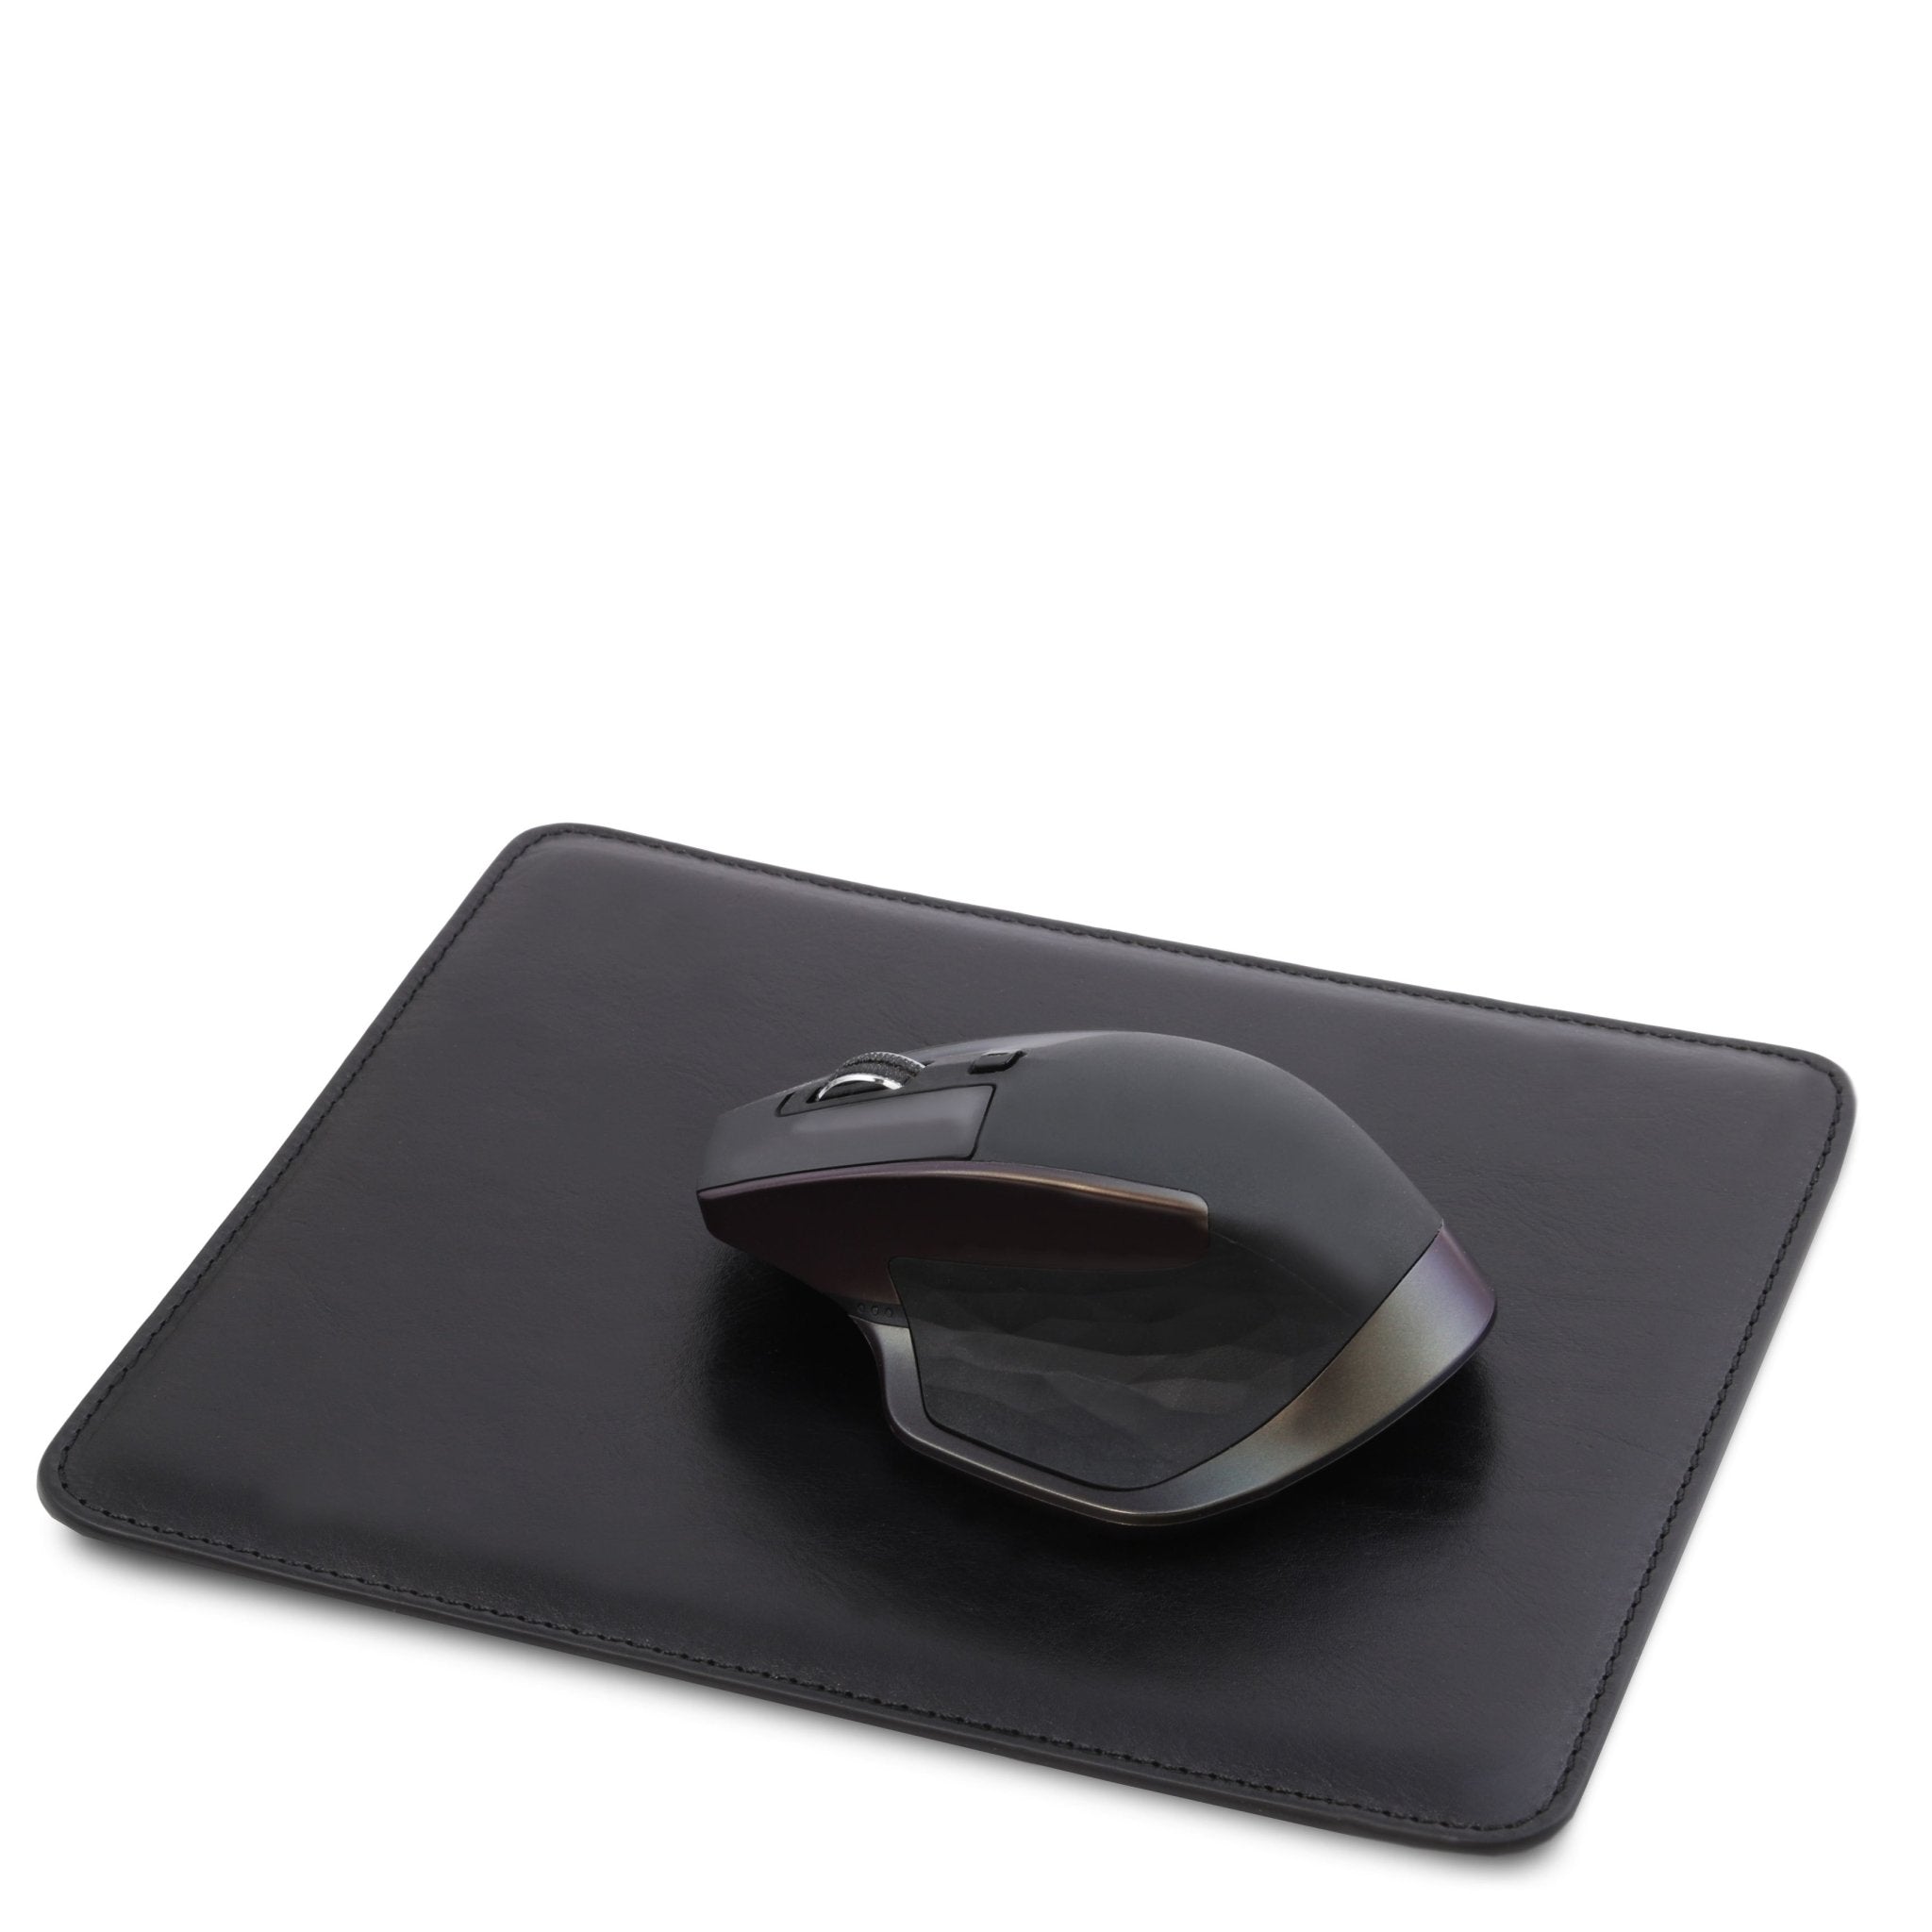 Italian Leather Desk Pad, Mouse Pad and Valet Tray - L'Atelier Global